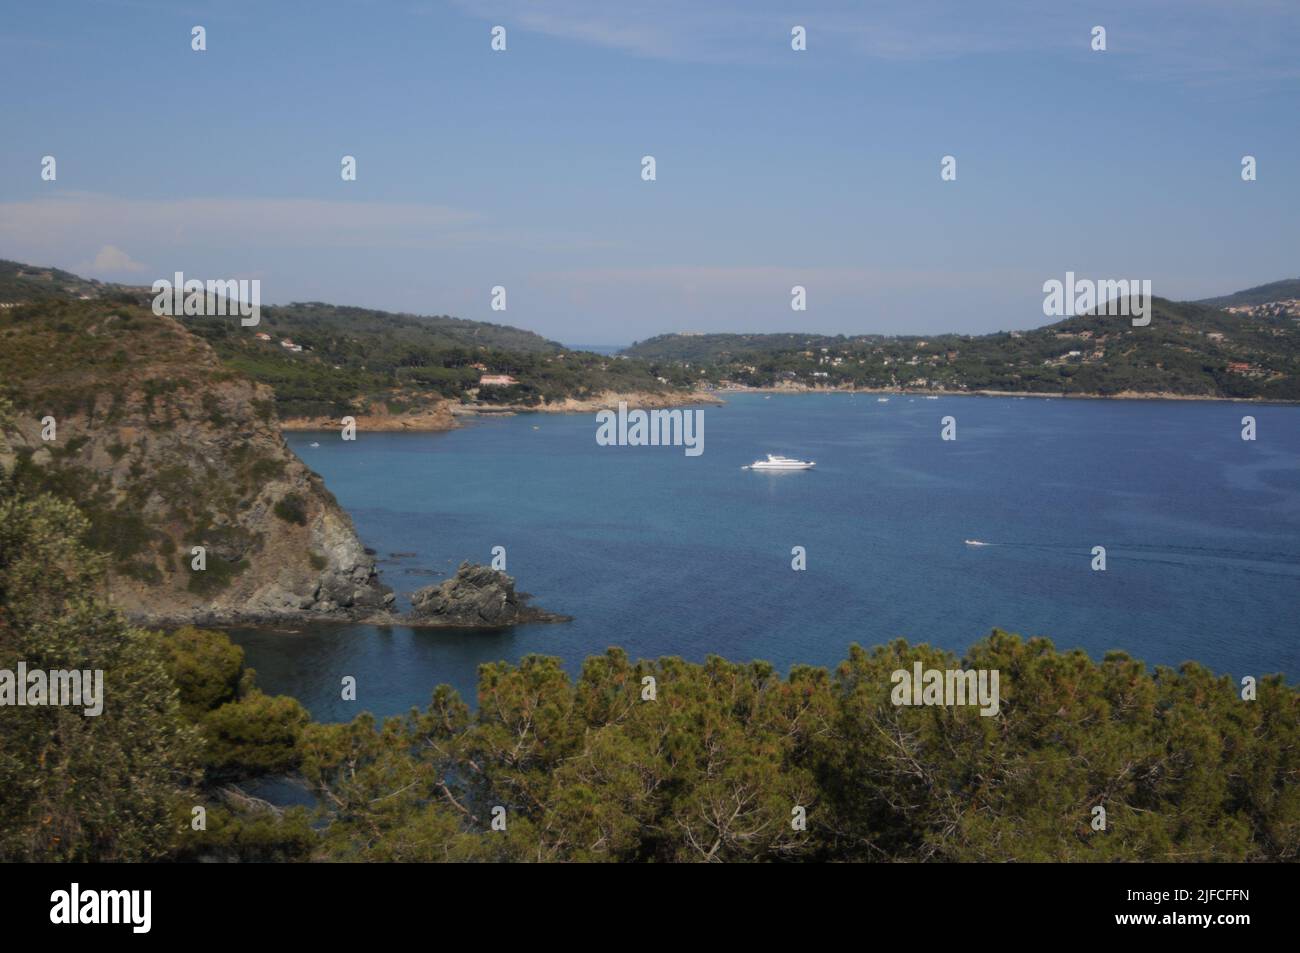 Views from above of the splendid nature of the island of Elba, in Tuscany Stock Photo